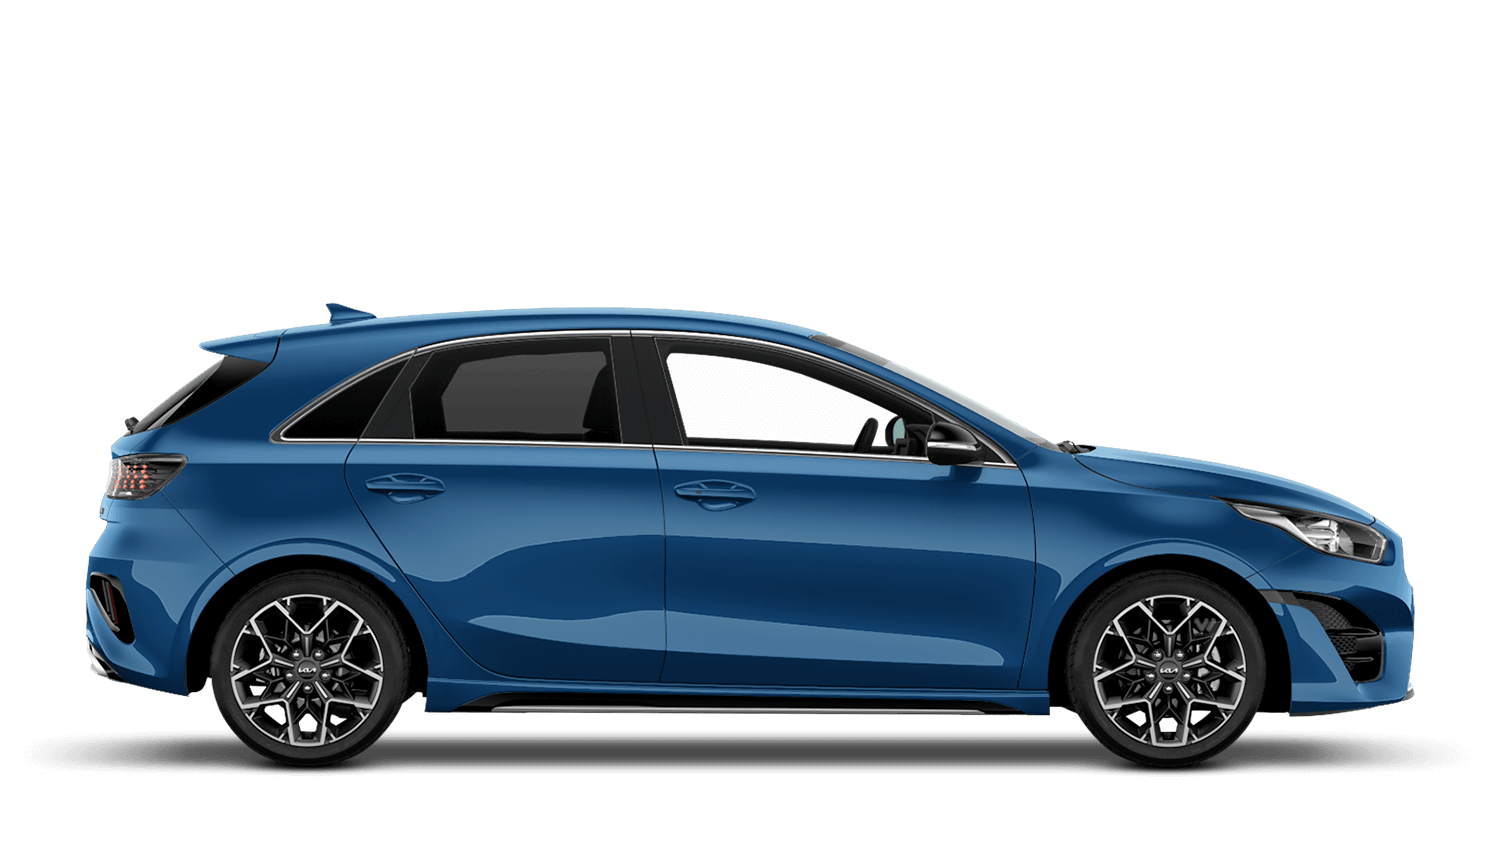 Kia Ceed Personal Contract Purchase Offers